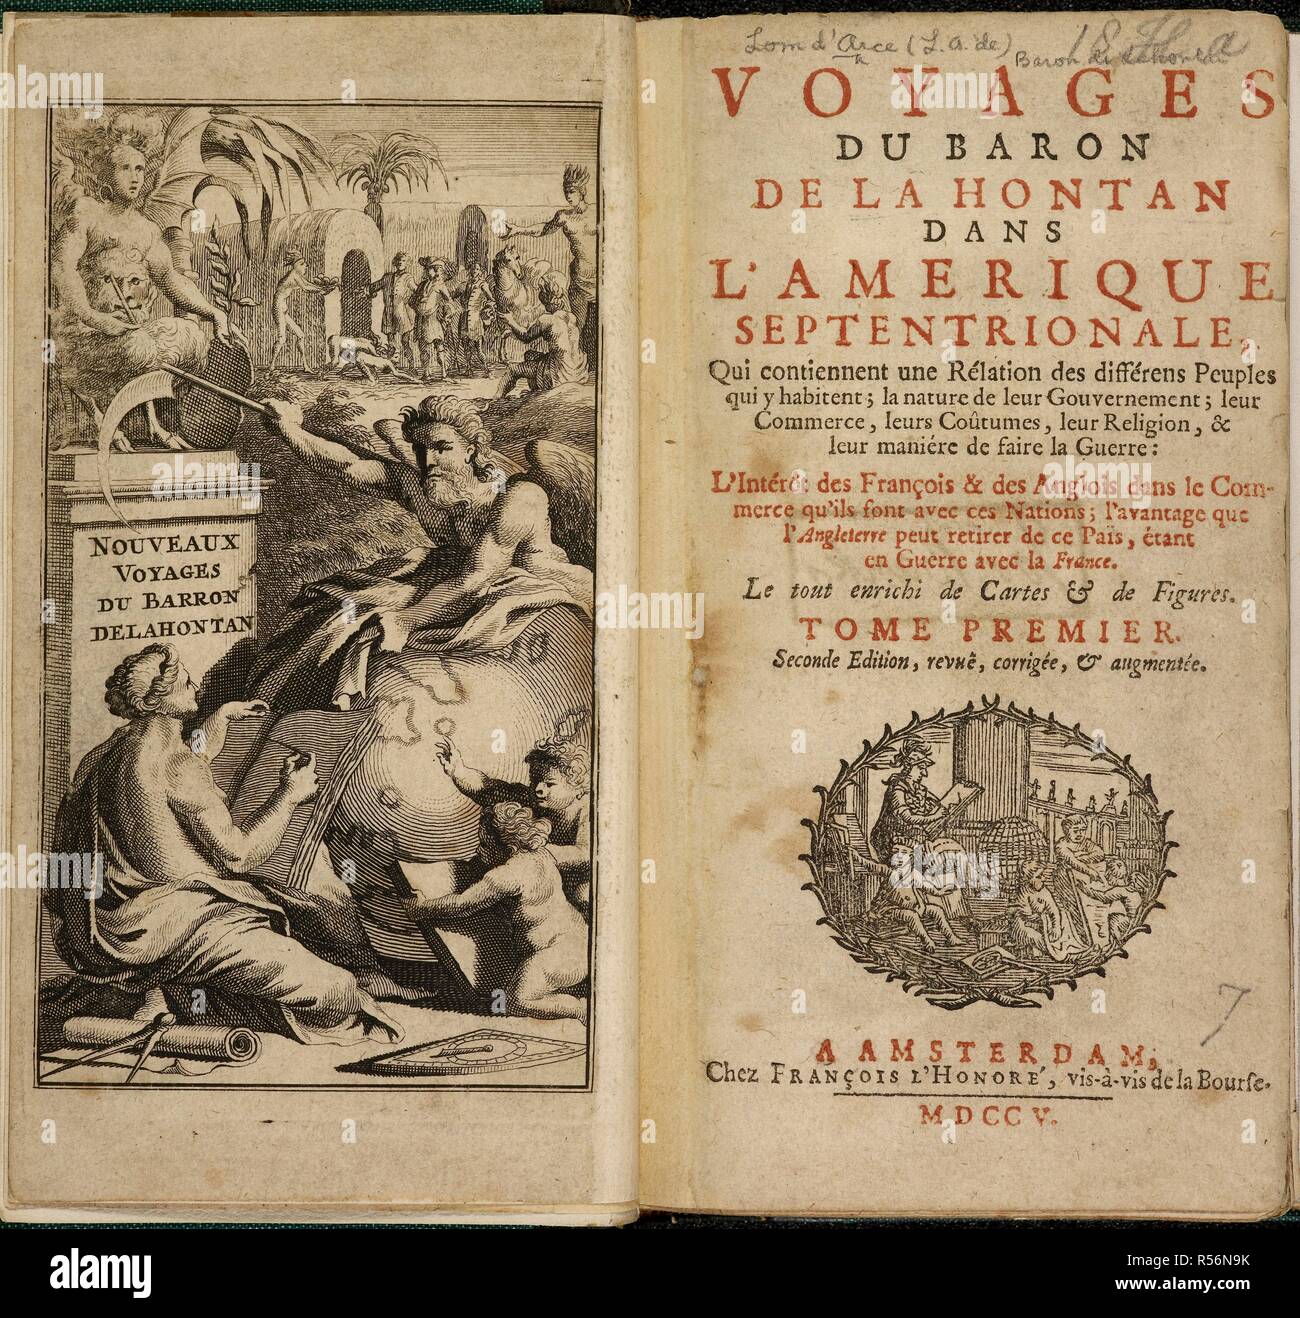 Illustrated frontispiece with symbolic imagery, and in the background, Europeans can be seen encountering native American people. Louis Armand, Baron de Lahontan (9 June 1666 â€“ prior to 1716) served in the French military in Canada where he traveled extensively in the Wisconsin and Minnesota region and the upper Mississippi Valley. Voyages du Baron De La Hontan dans lâ€™AmeÌrique septentrionale ... Amsterdam, 1705. Source: 979.a.24,25 frontispiece & Title page. Language: French. Author: Lom D'Arce, Louis Armand de, Baron de Lahontan. Stock Photo